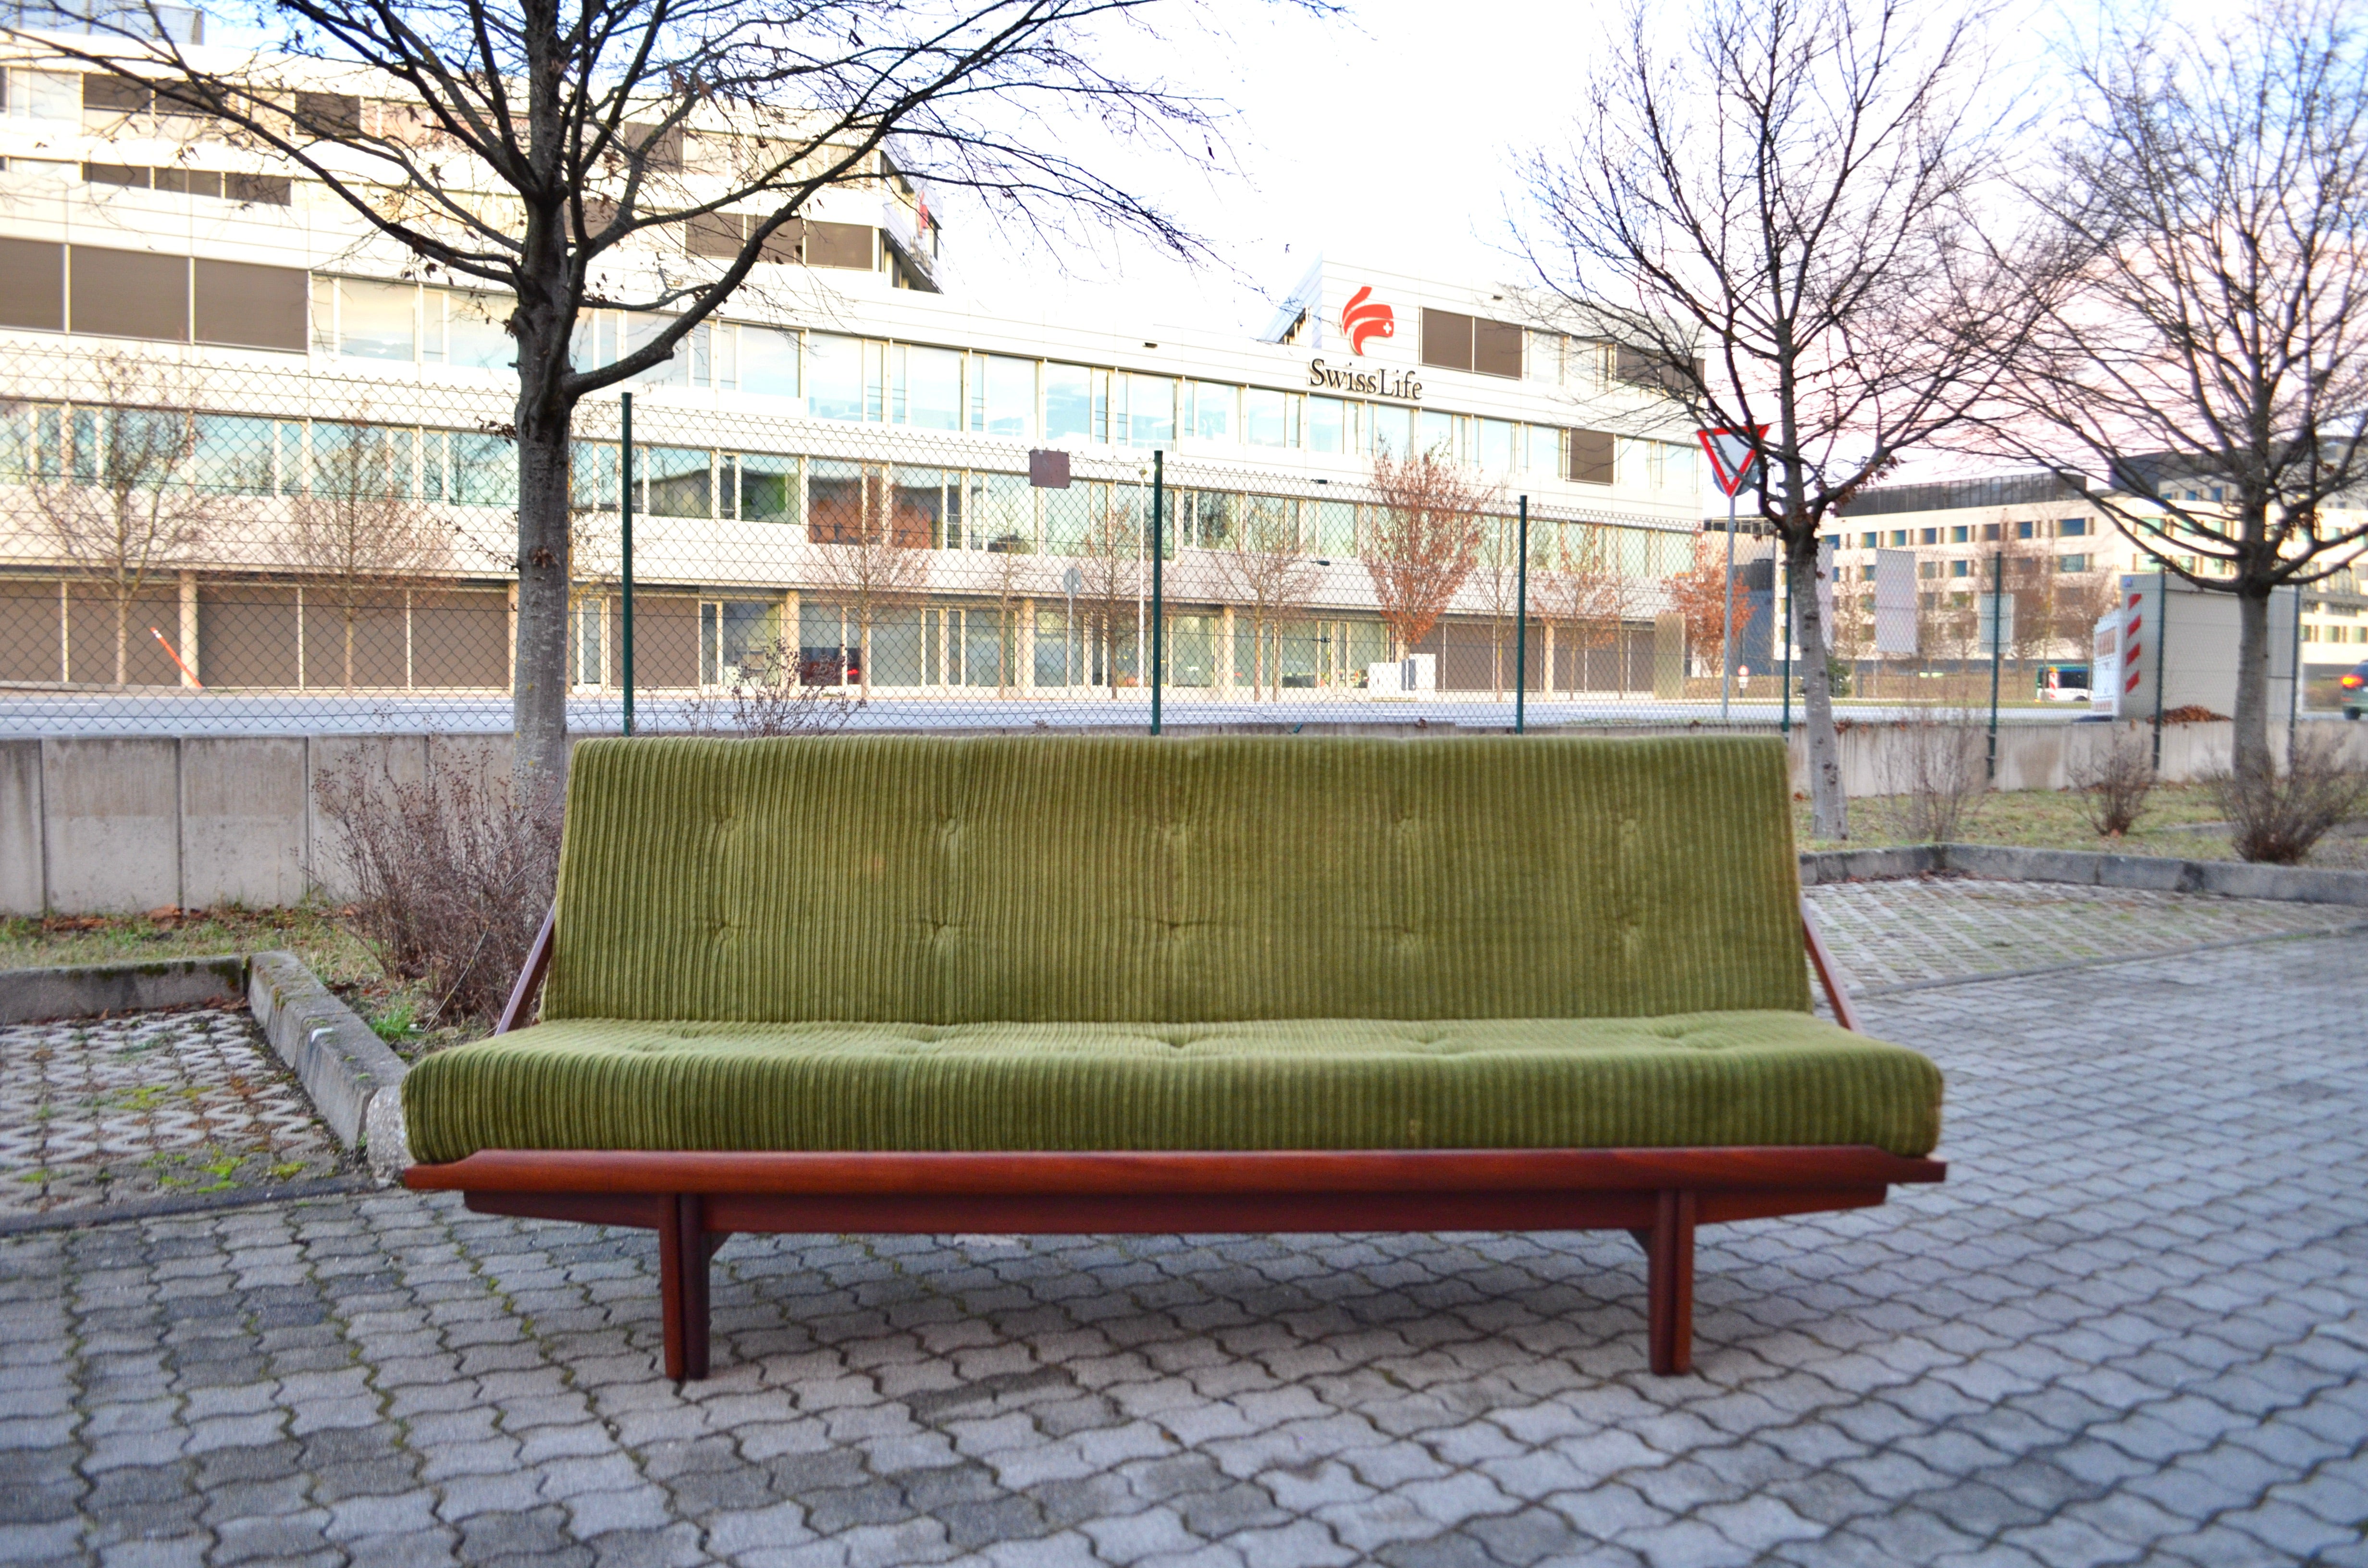 Danish Modern Mid Century Daybed Modell 981 DIVA by Poul Volther for Frem Røjle.
1st Edition by the 1st manufacturer.
The frame is made of solid teak wood and the fabric is a  green cord colour.
Everything is still in Original condition.
Featured